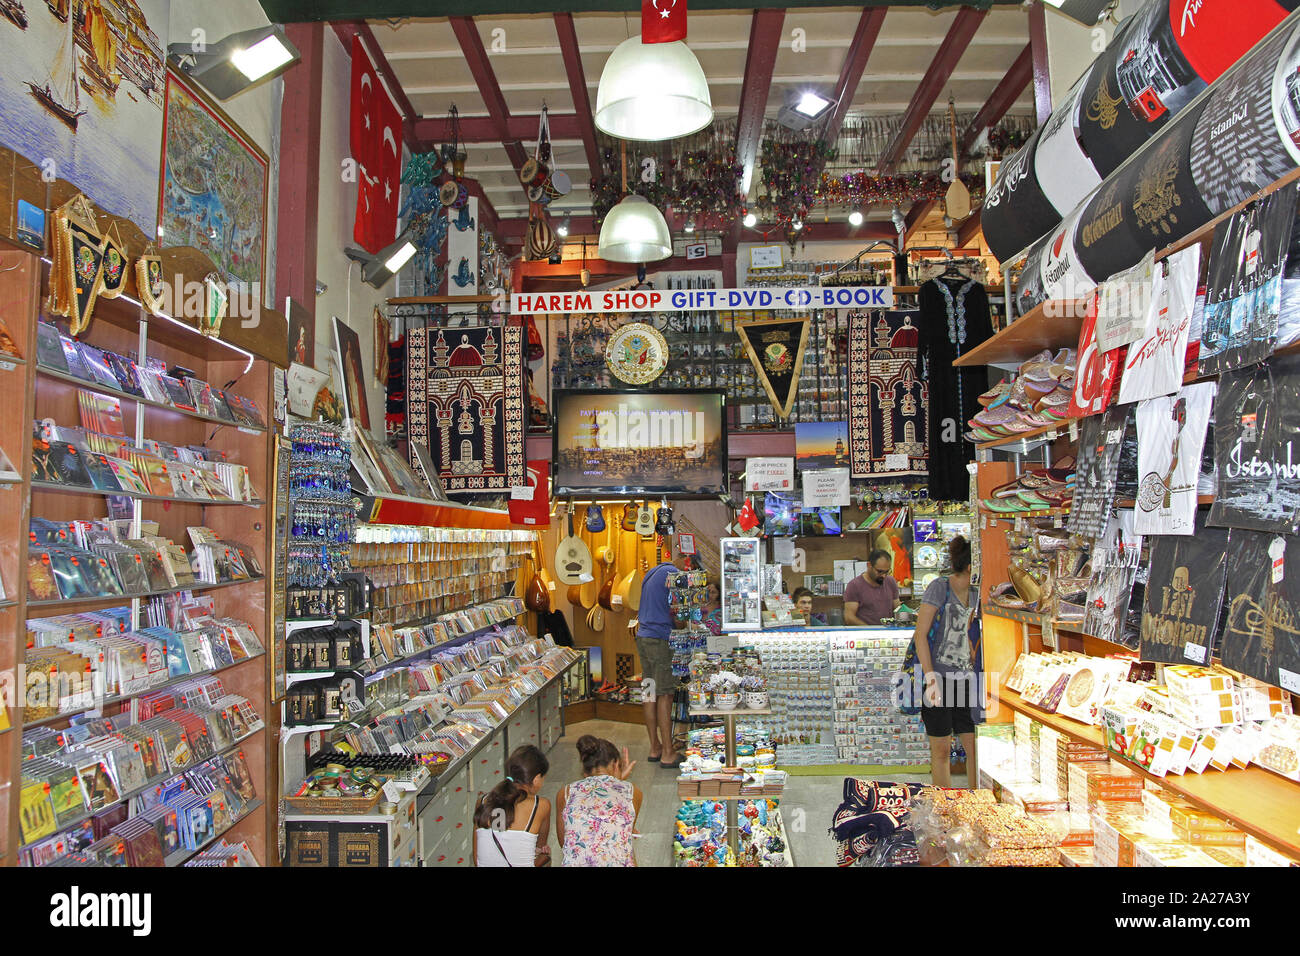 Musical and religious items sold at a religious music gift shop, Itanbul, Turkey. Stock Photo